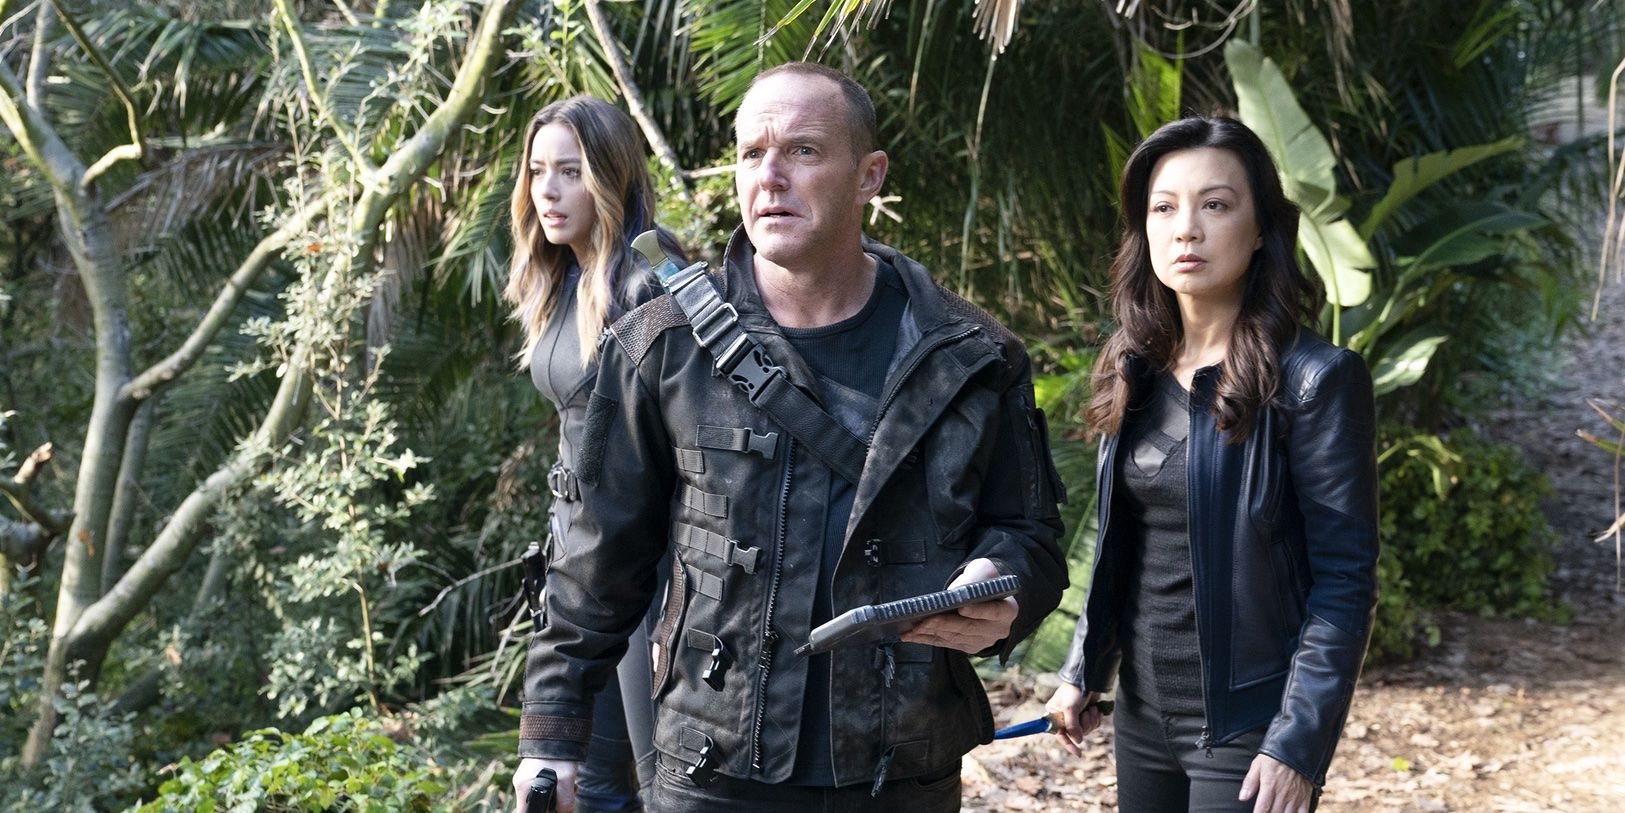 Ming-Na Wen, Clark Gregg and Chloe Bennet in 'Agents of S.H.I.E.L.D.'